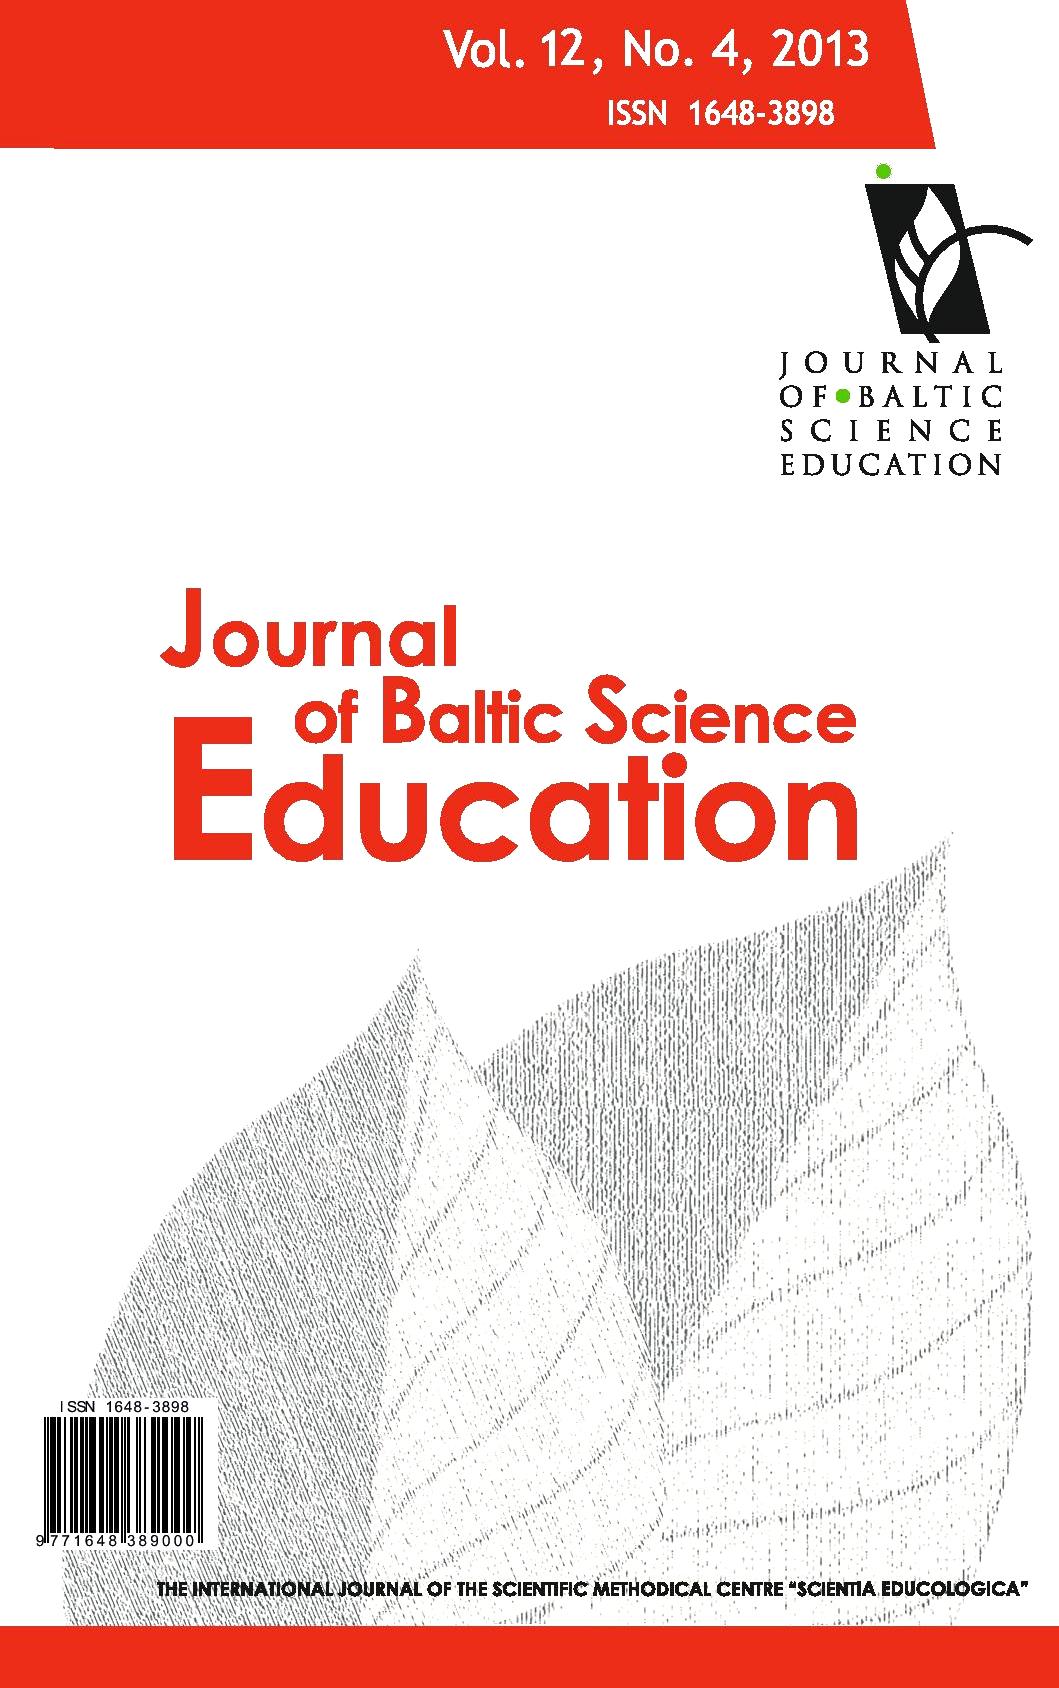 NATURAL SCIENCE EDUCATION IMPORTANCE IN ADOLESCENCE